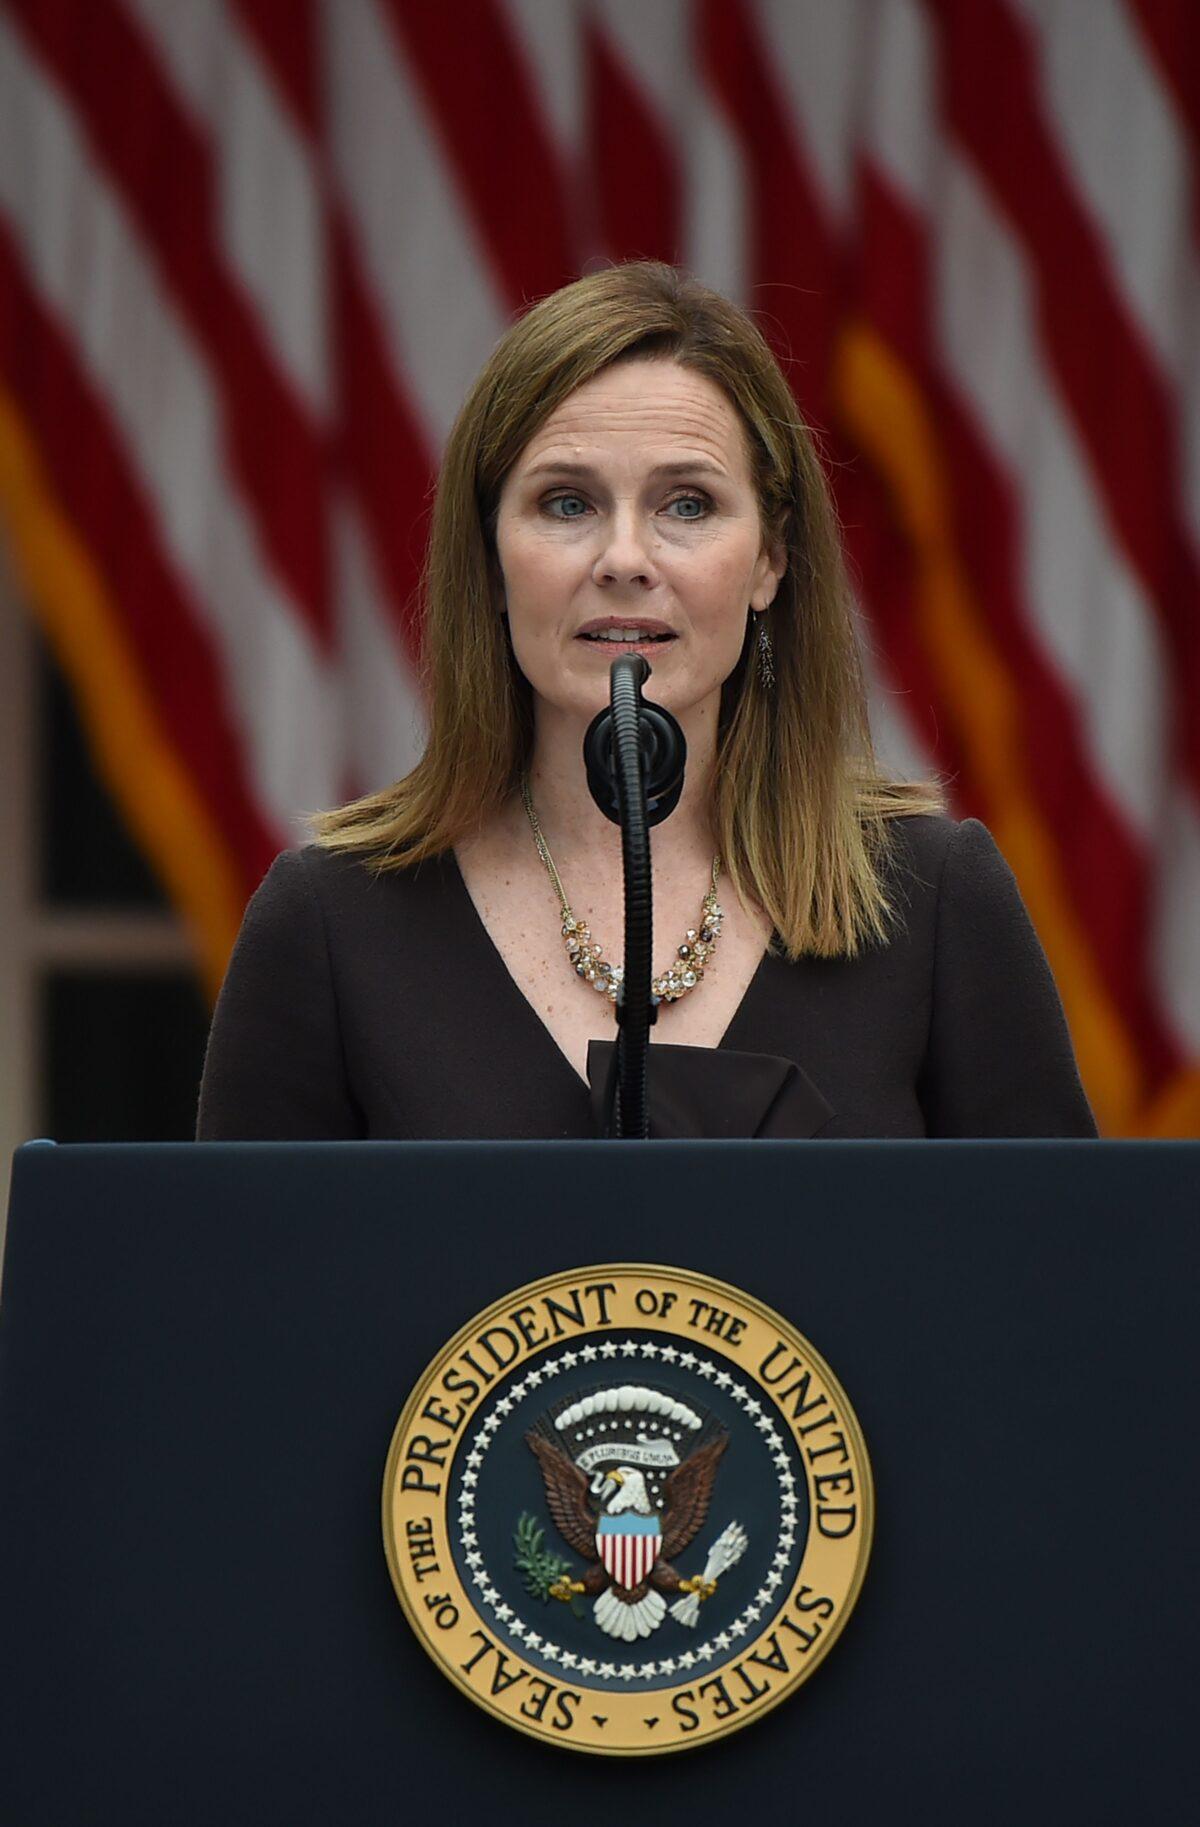 Seventh U.S. Circuit Court Judge Amy Coney Barrett speaks after being nominated to the Supreme Court, at the White House on Sept. 26, 2020. (Olivier Douliery/AFP via Getty Images)